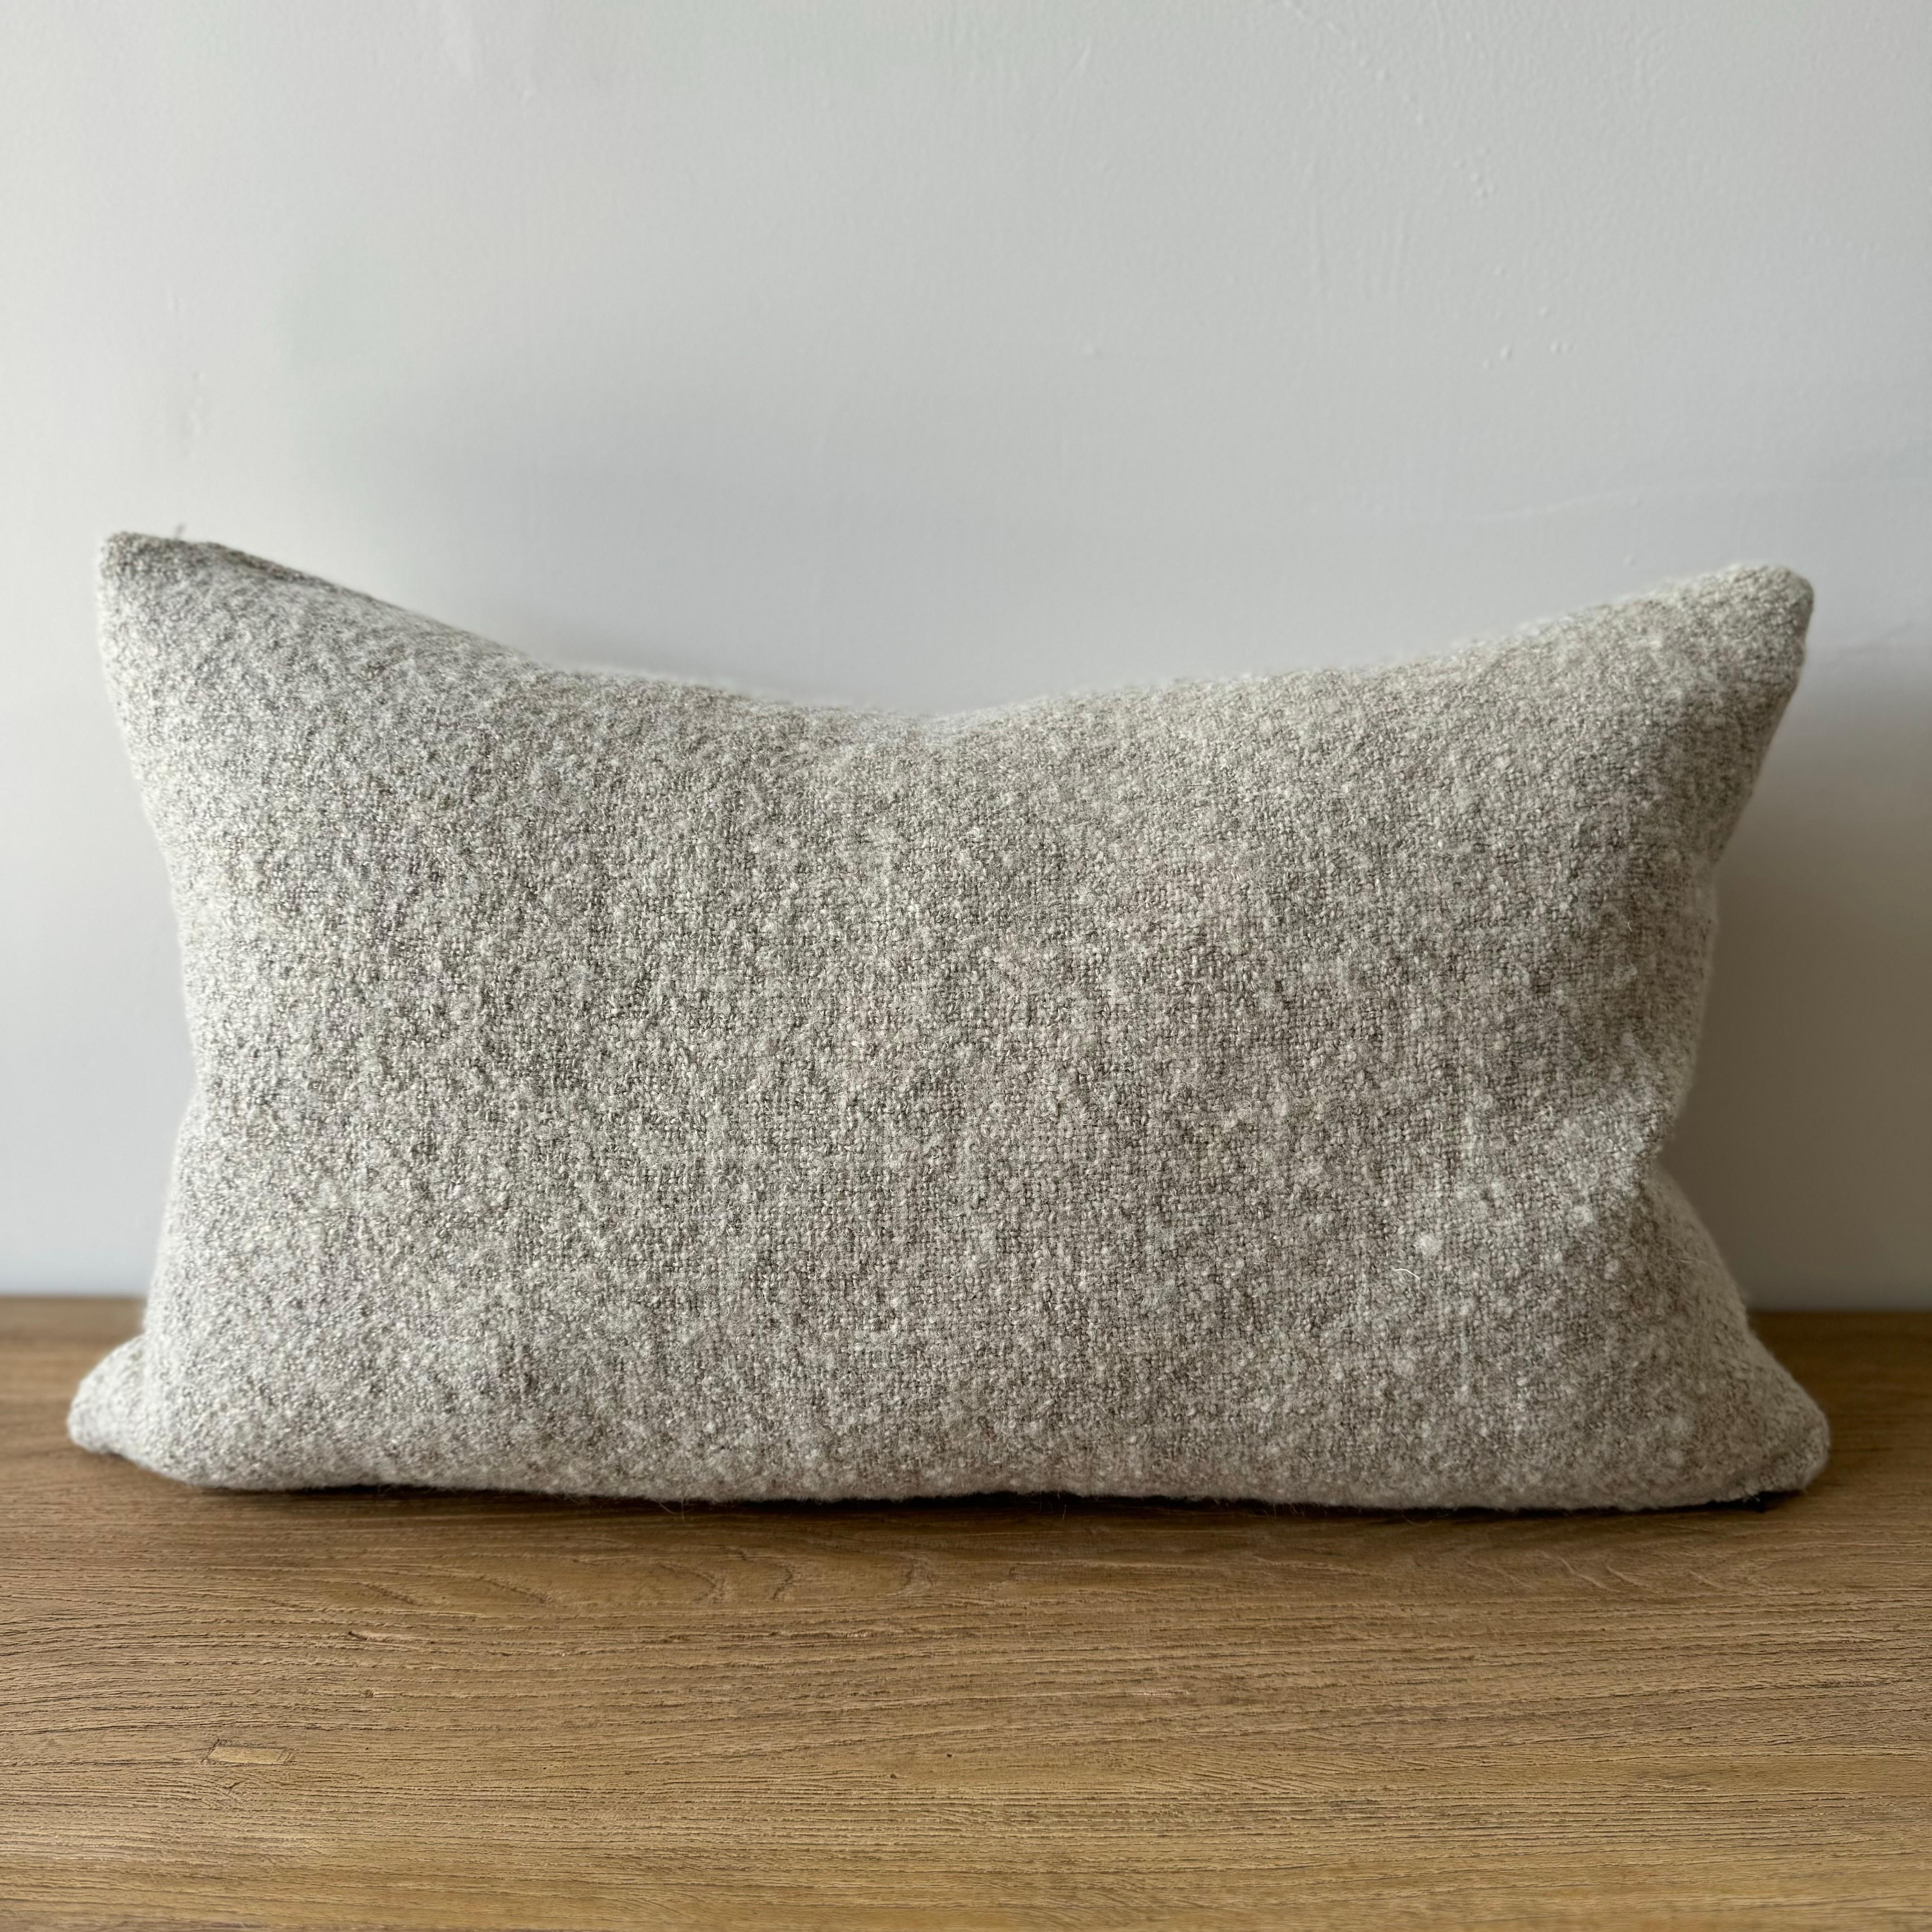 Custom Linen and Wool Lumbar Pillow in Flax with Down Feather Insert For Sale 2